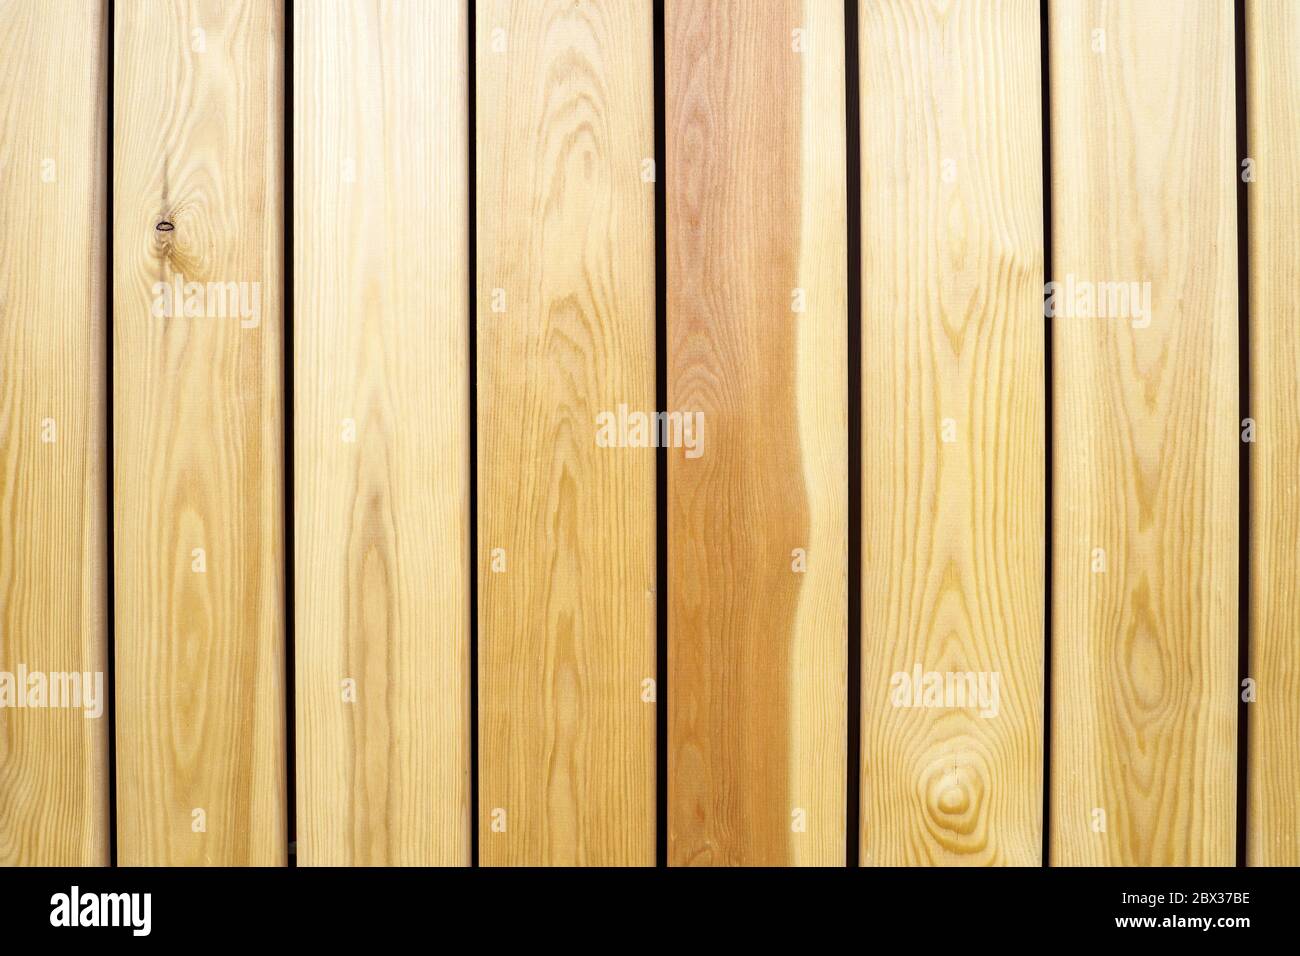 Wooden planks vertical background, natural textured backdrop. Stock Photo